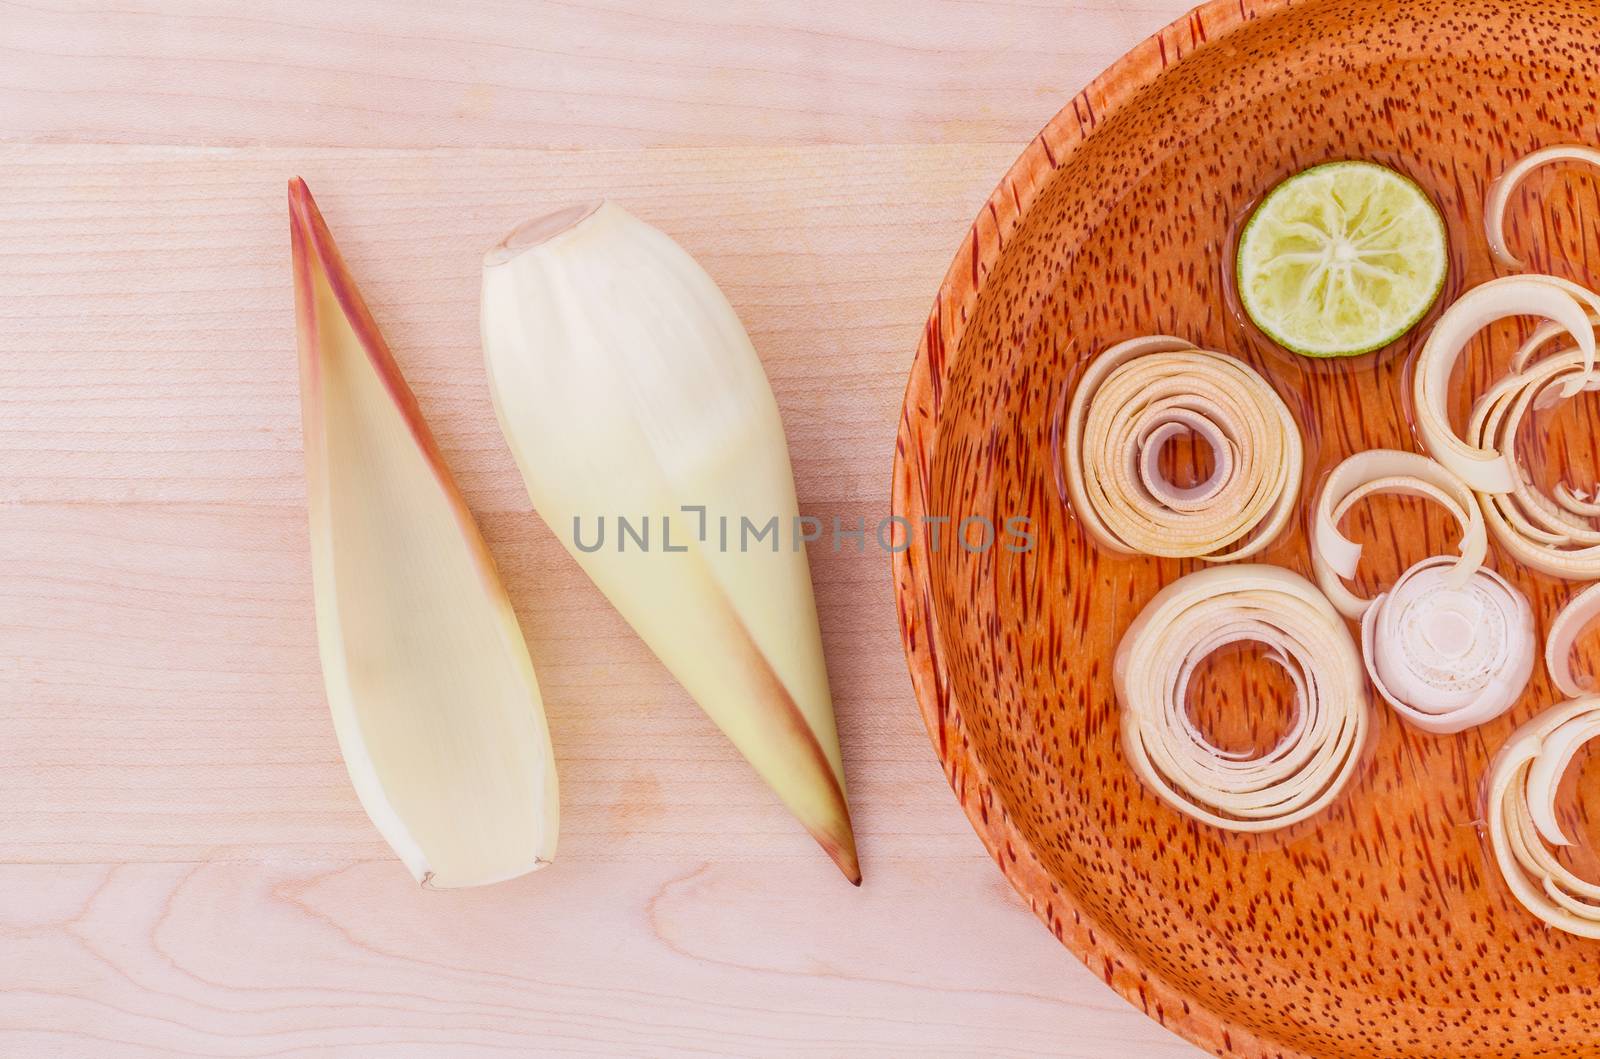 Banana blossom healthy vegetable alternative and clean food on w by kerdkanno